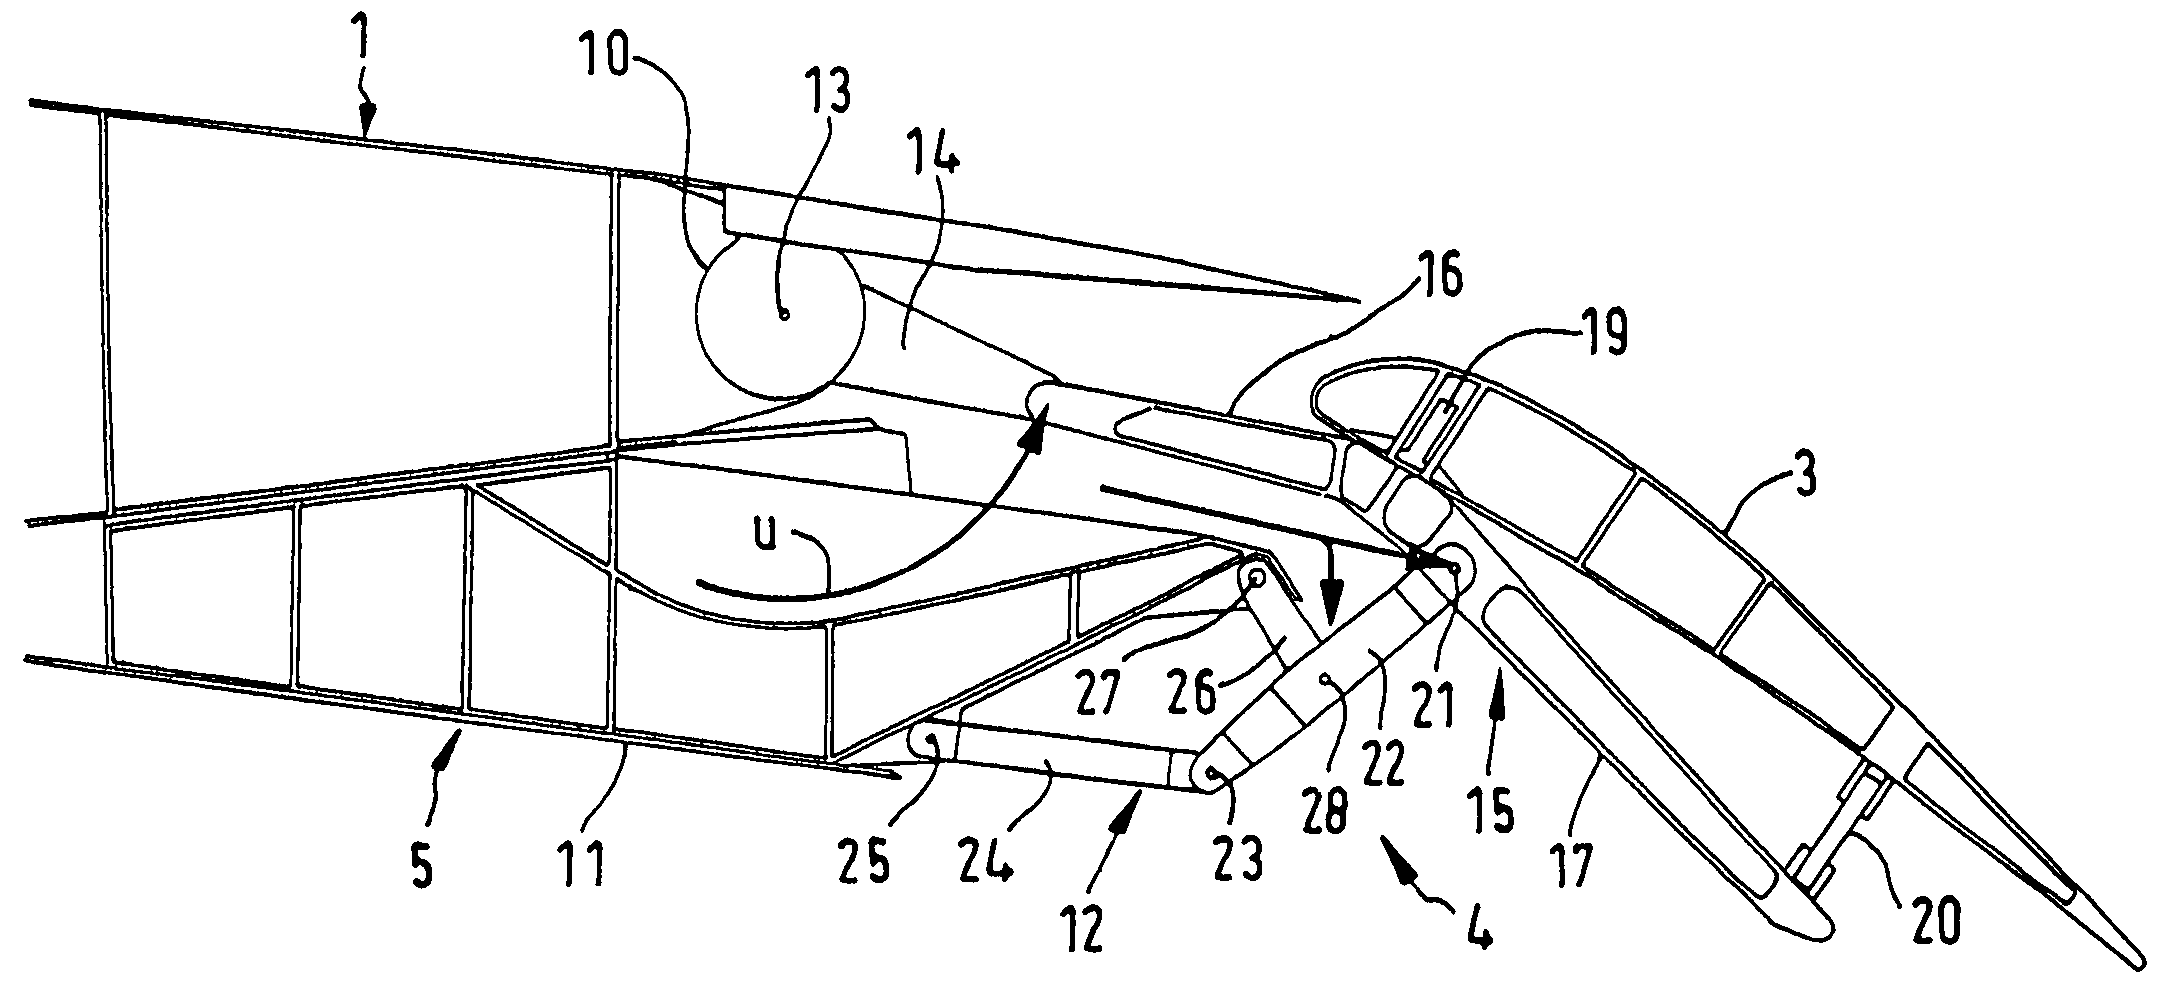 Pivoted flap mechanism for adjusting an aerodynamic pivoted flap associated with a wing